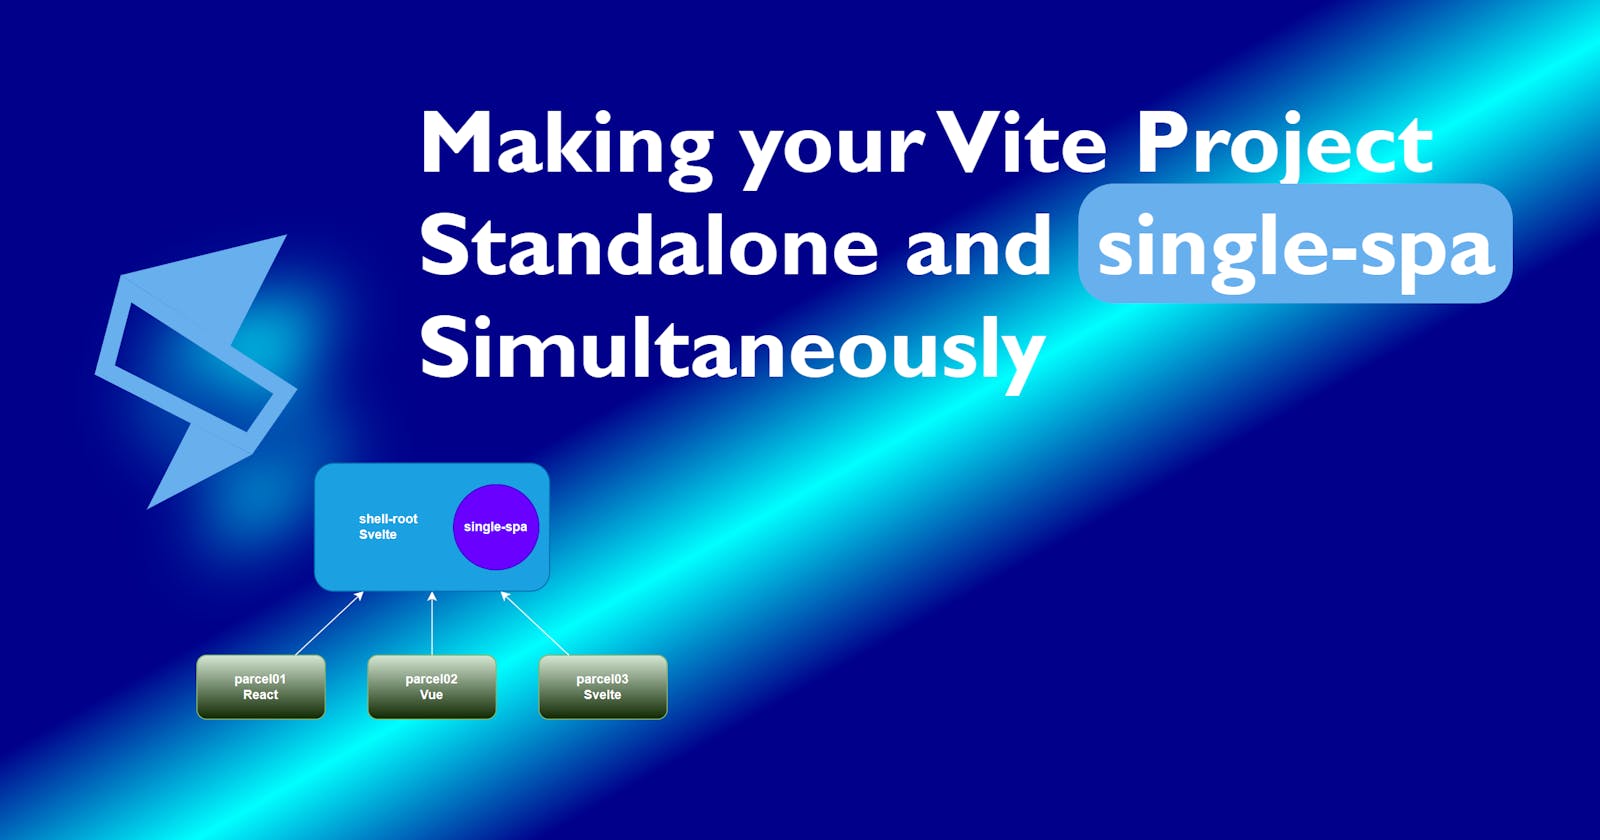 Making your Vite Project Standalone and single-spa Simultaneously